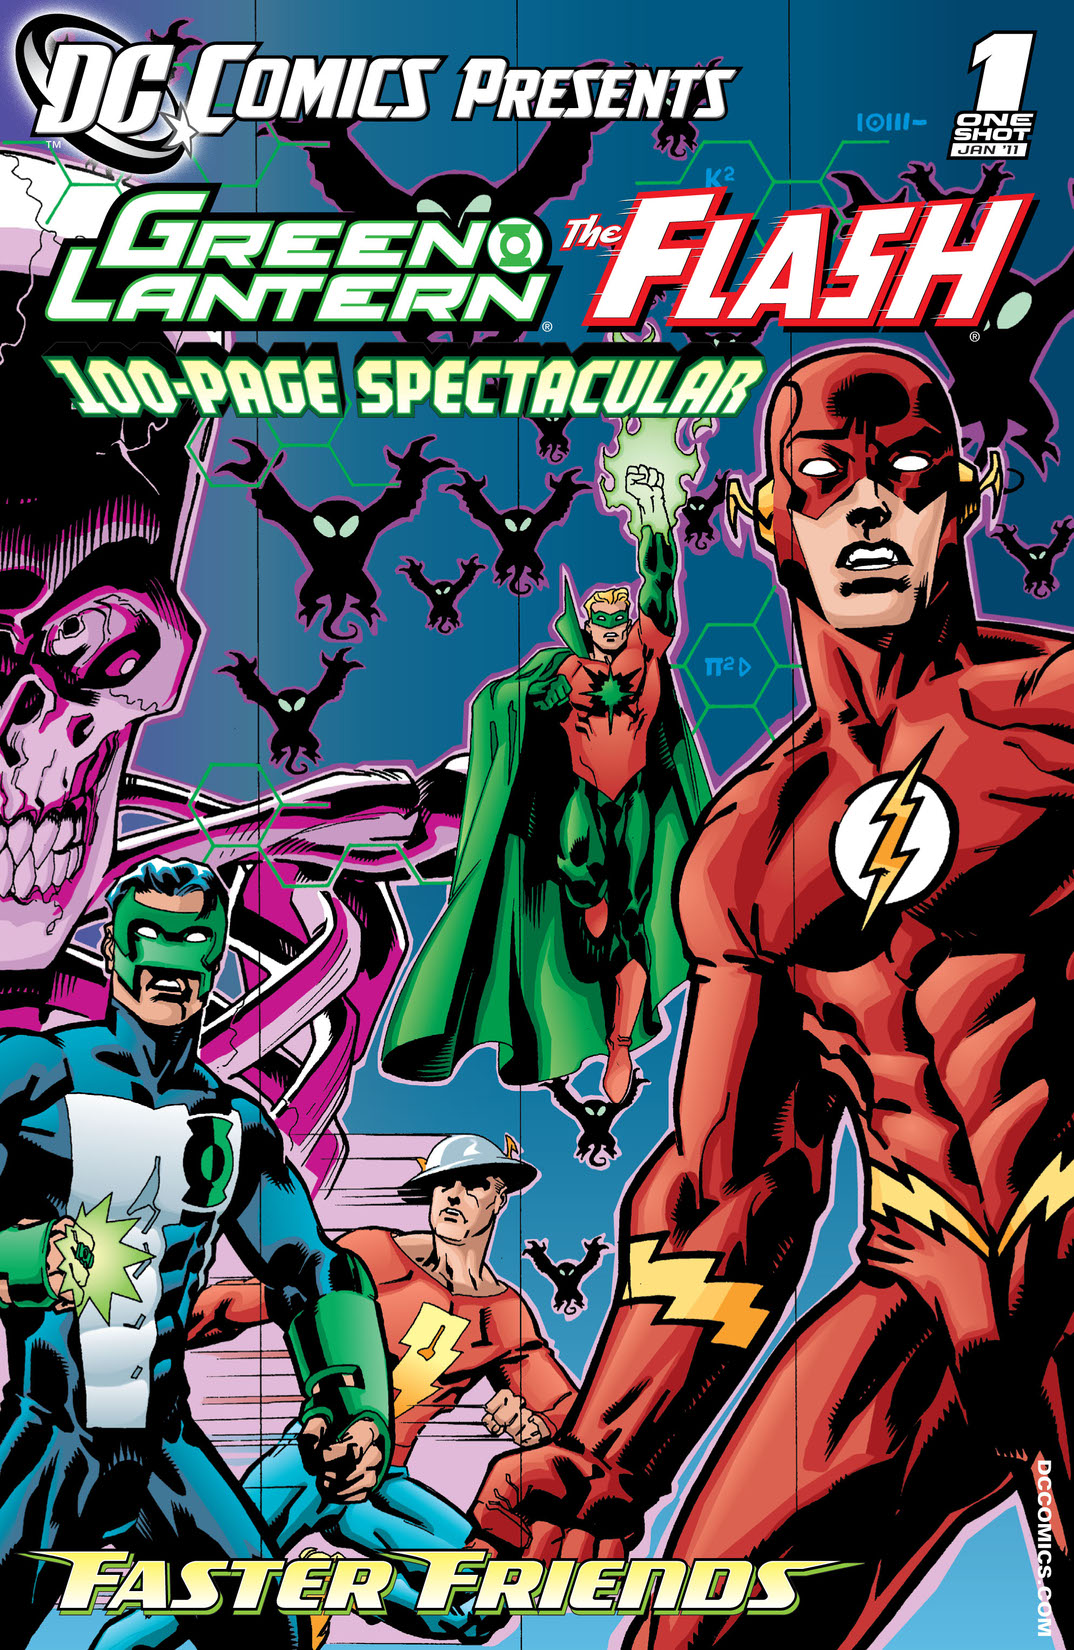 DC Comics Presents: Green Lantern/Flash: Faster Friends (2010-) #1 preview images